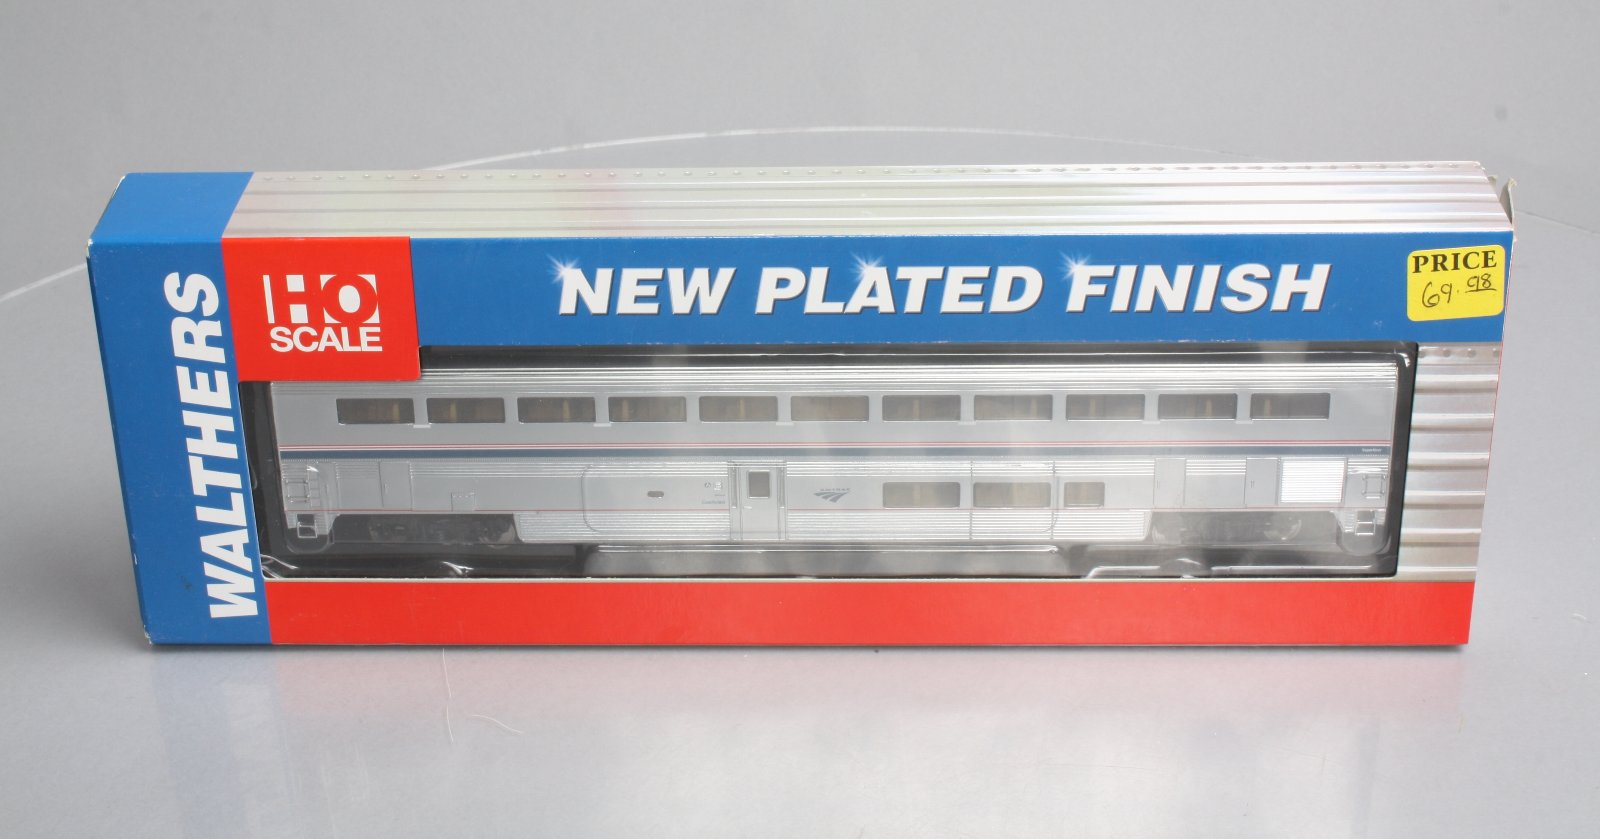 Walthers 932-16164 HO Scale Amtrak Superliner Coach Car